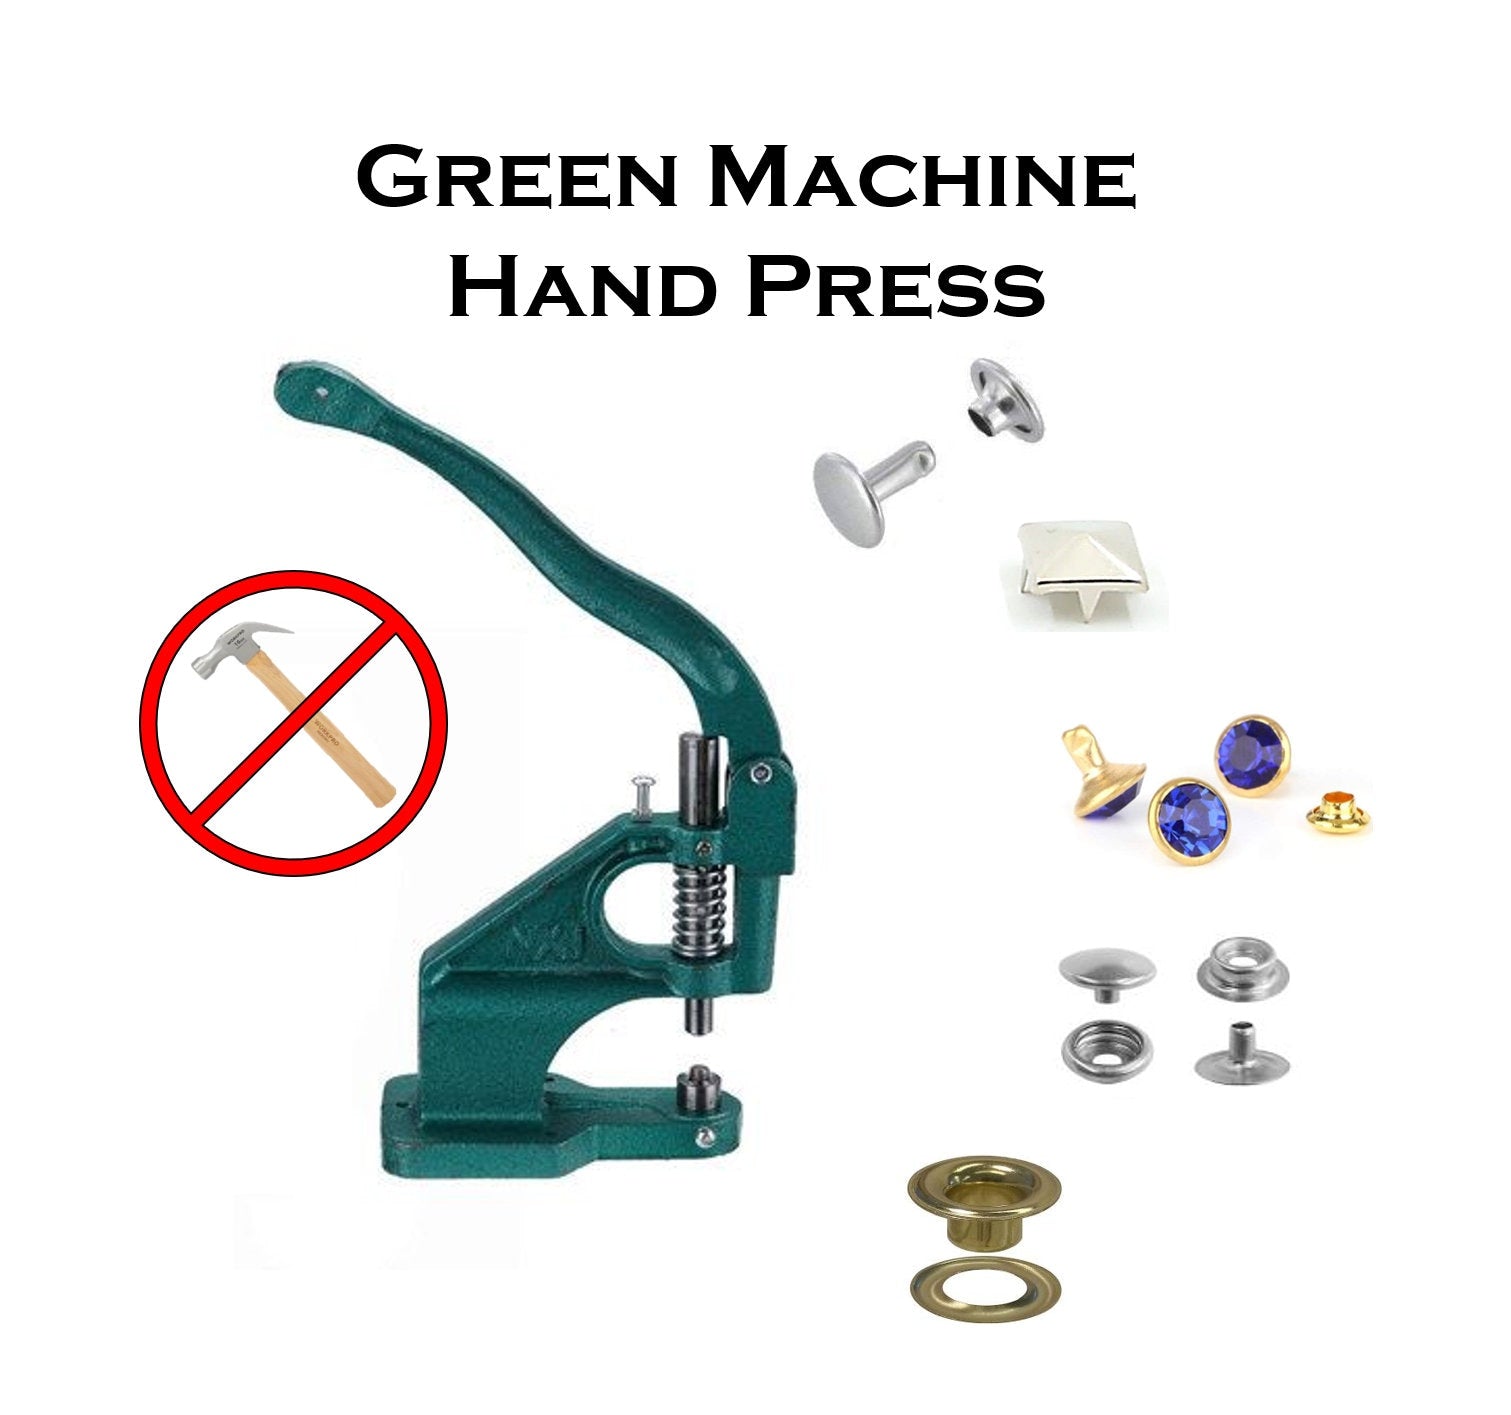 VIDEO: How to Use a Handheld Hole Punch Tool to Cut Holes for Rivets or  Grommets